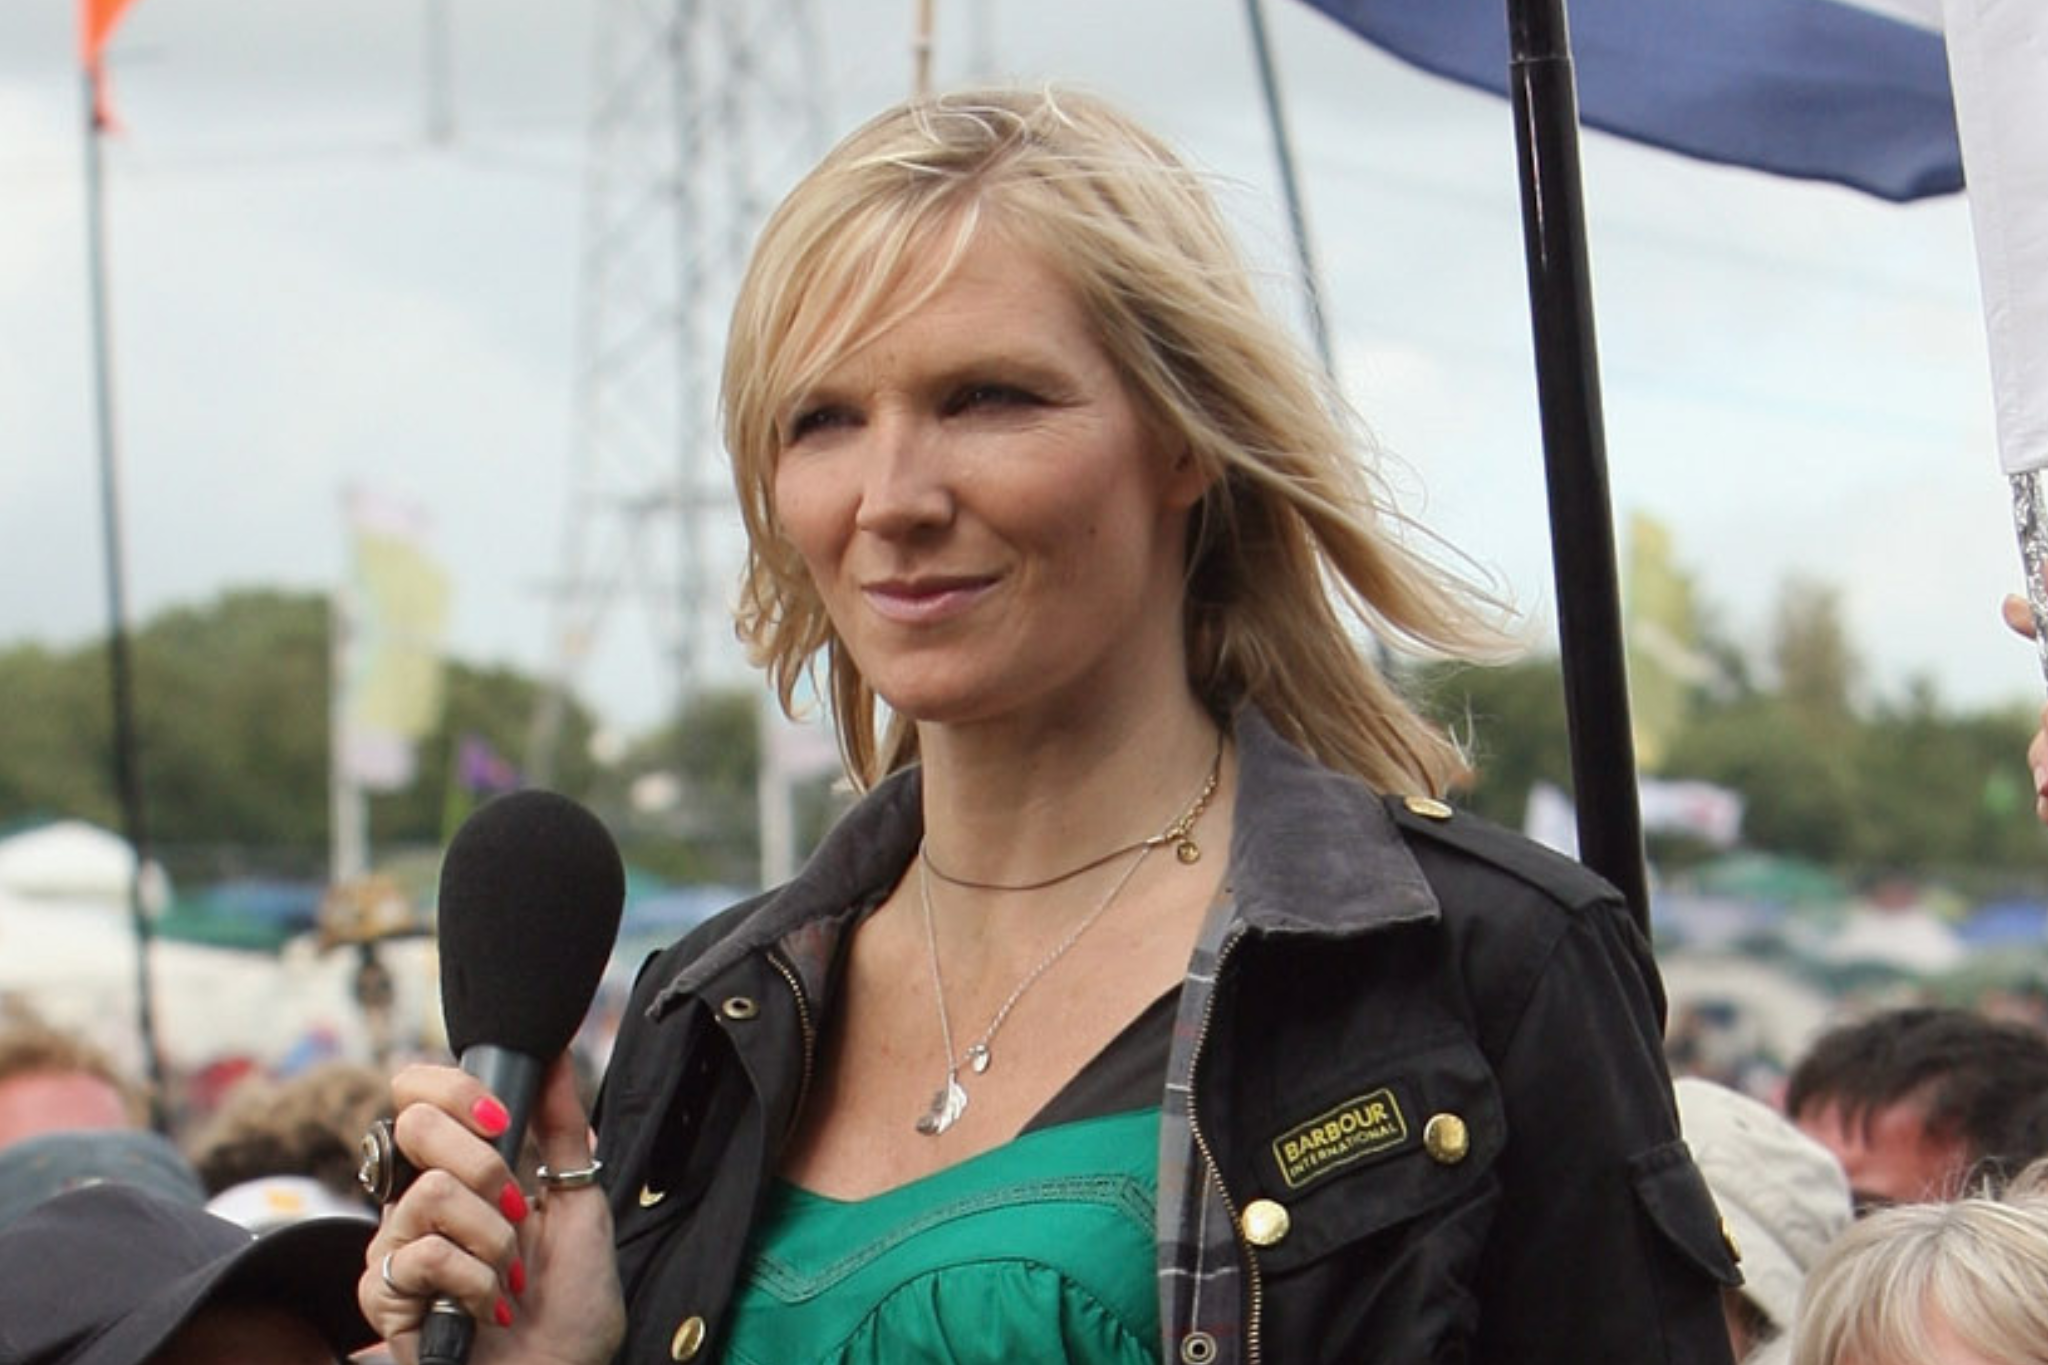 jo whiley, glastonbury, jo whiley says middle age won’t stop her glastonbury appearances